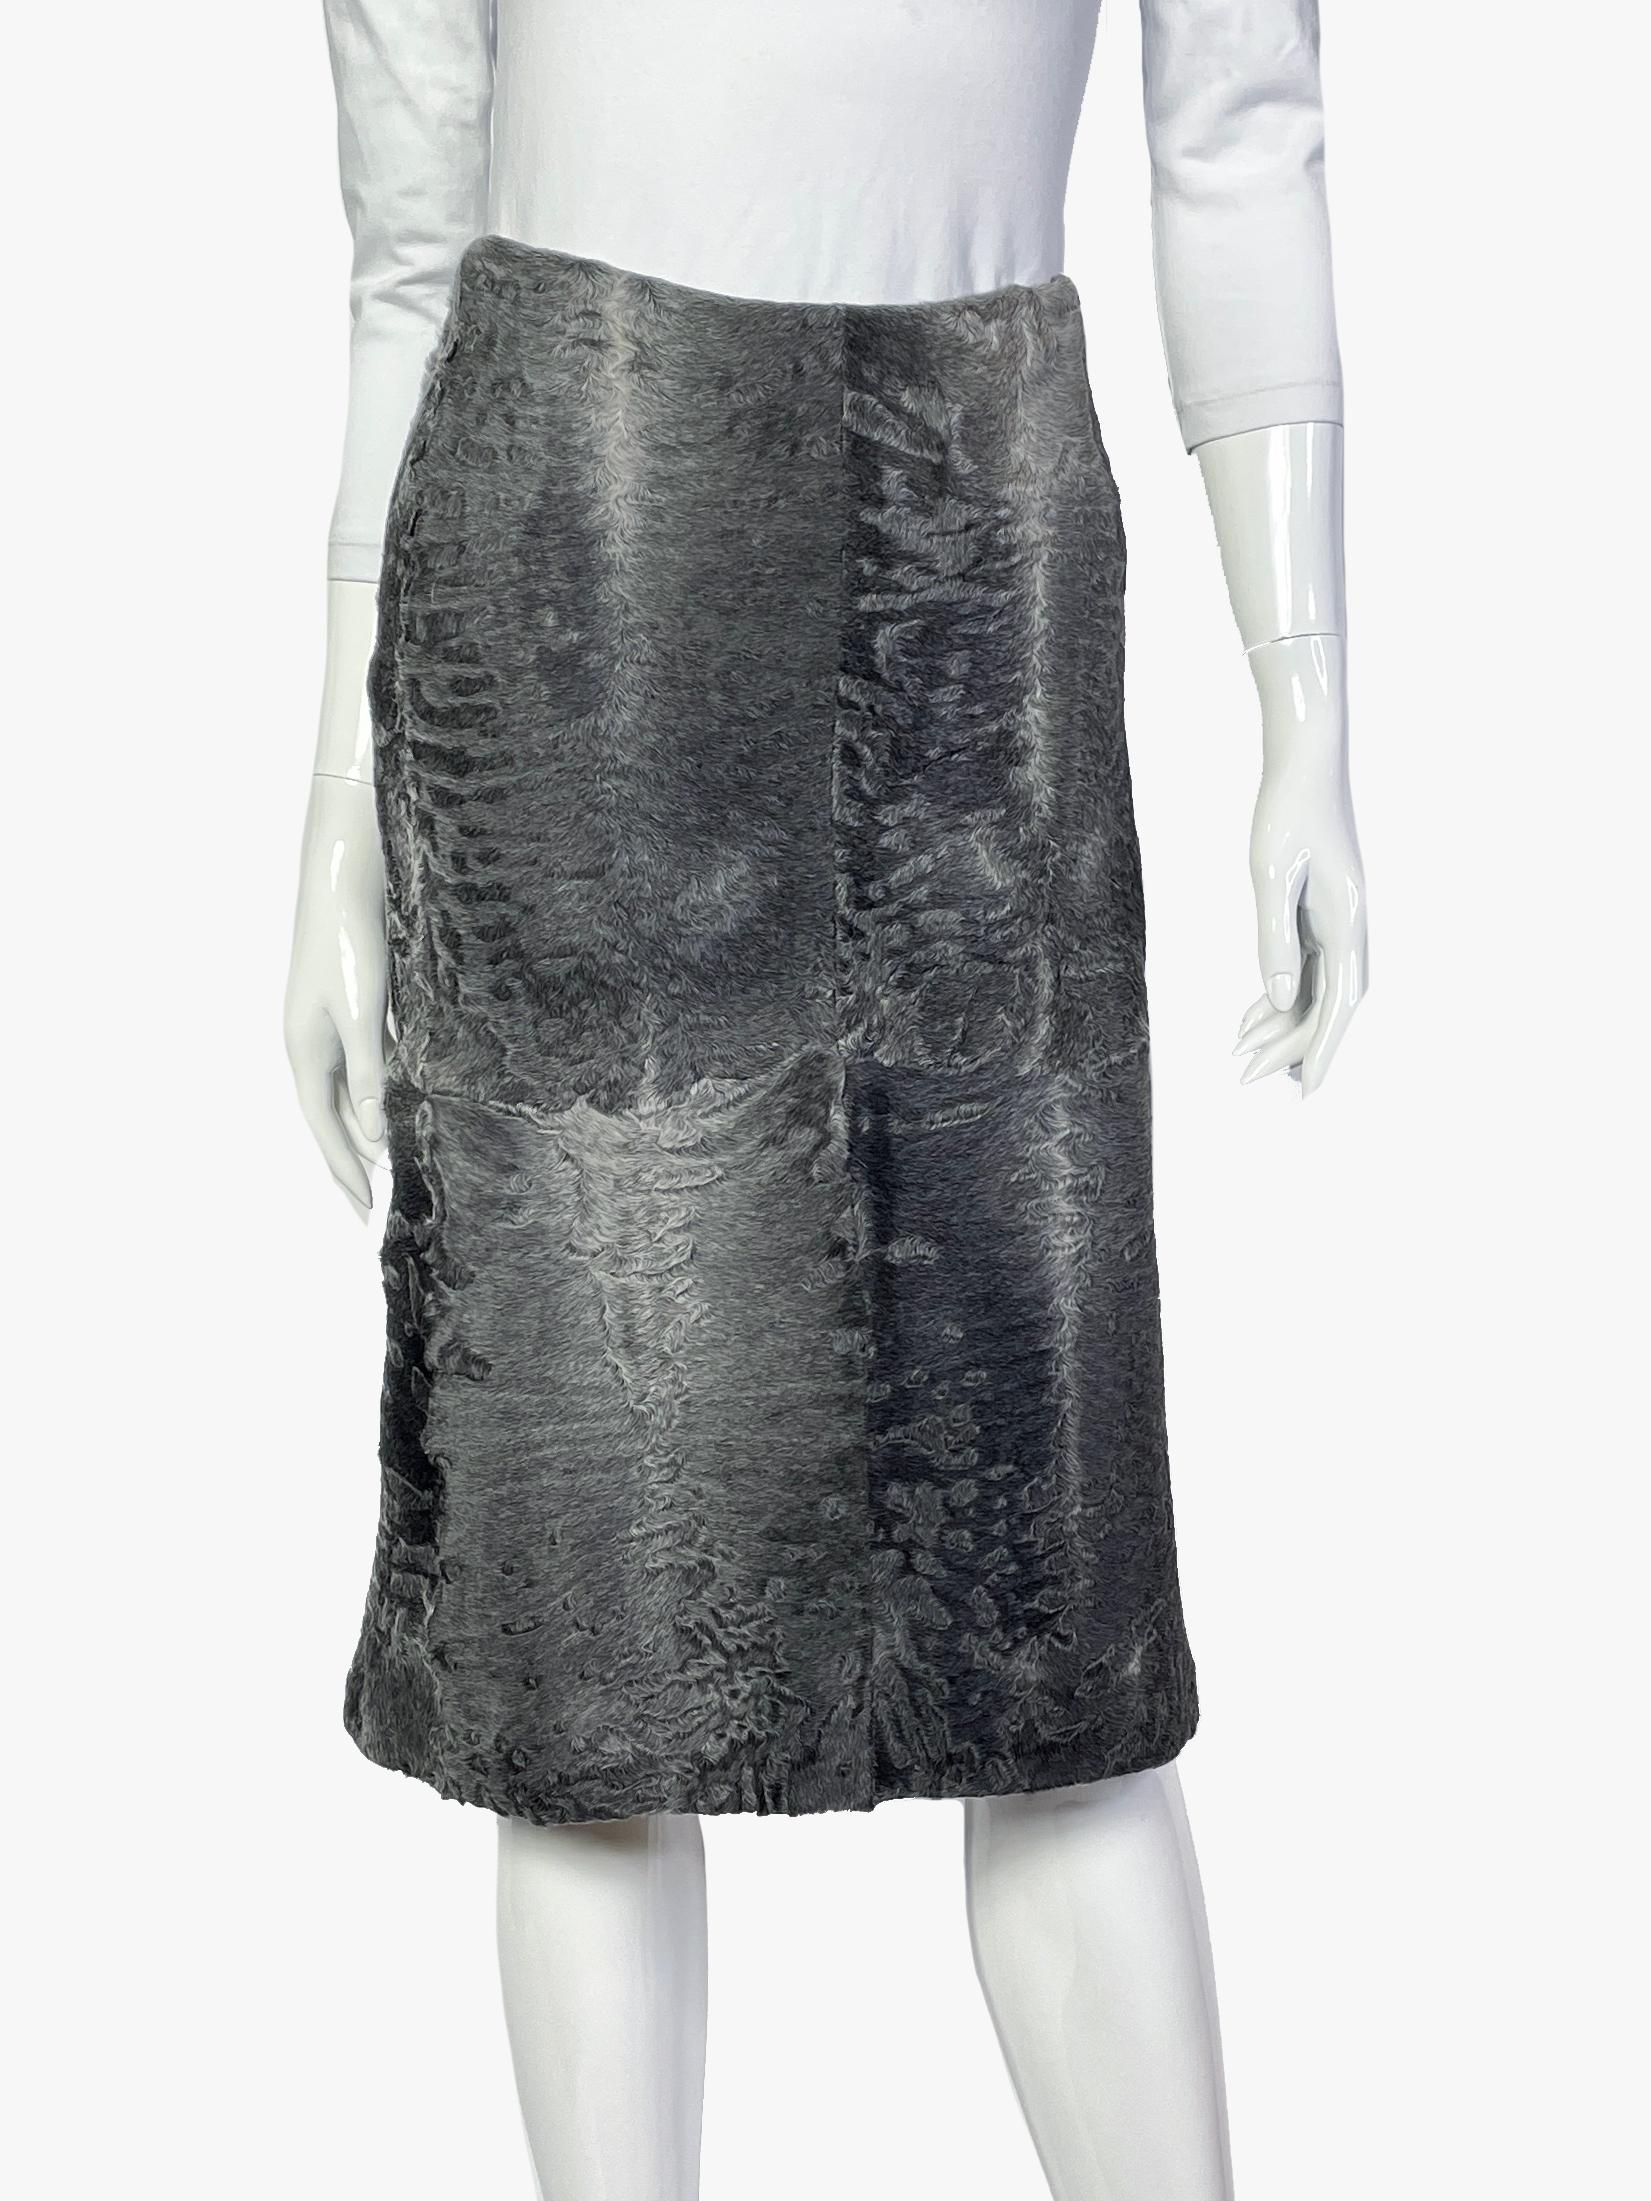 Prada Fall/Winter 1999 Runway Collection

Collector’s Archive Prada fur a-line skirt from the runway collection. Gorgeous, timeless winter piece for any chic capsule wardrobe.
Grey dyed lamb fur skirt. Knee length. A-line silhouette.
Size 42